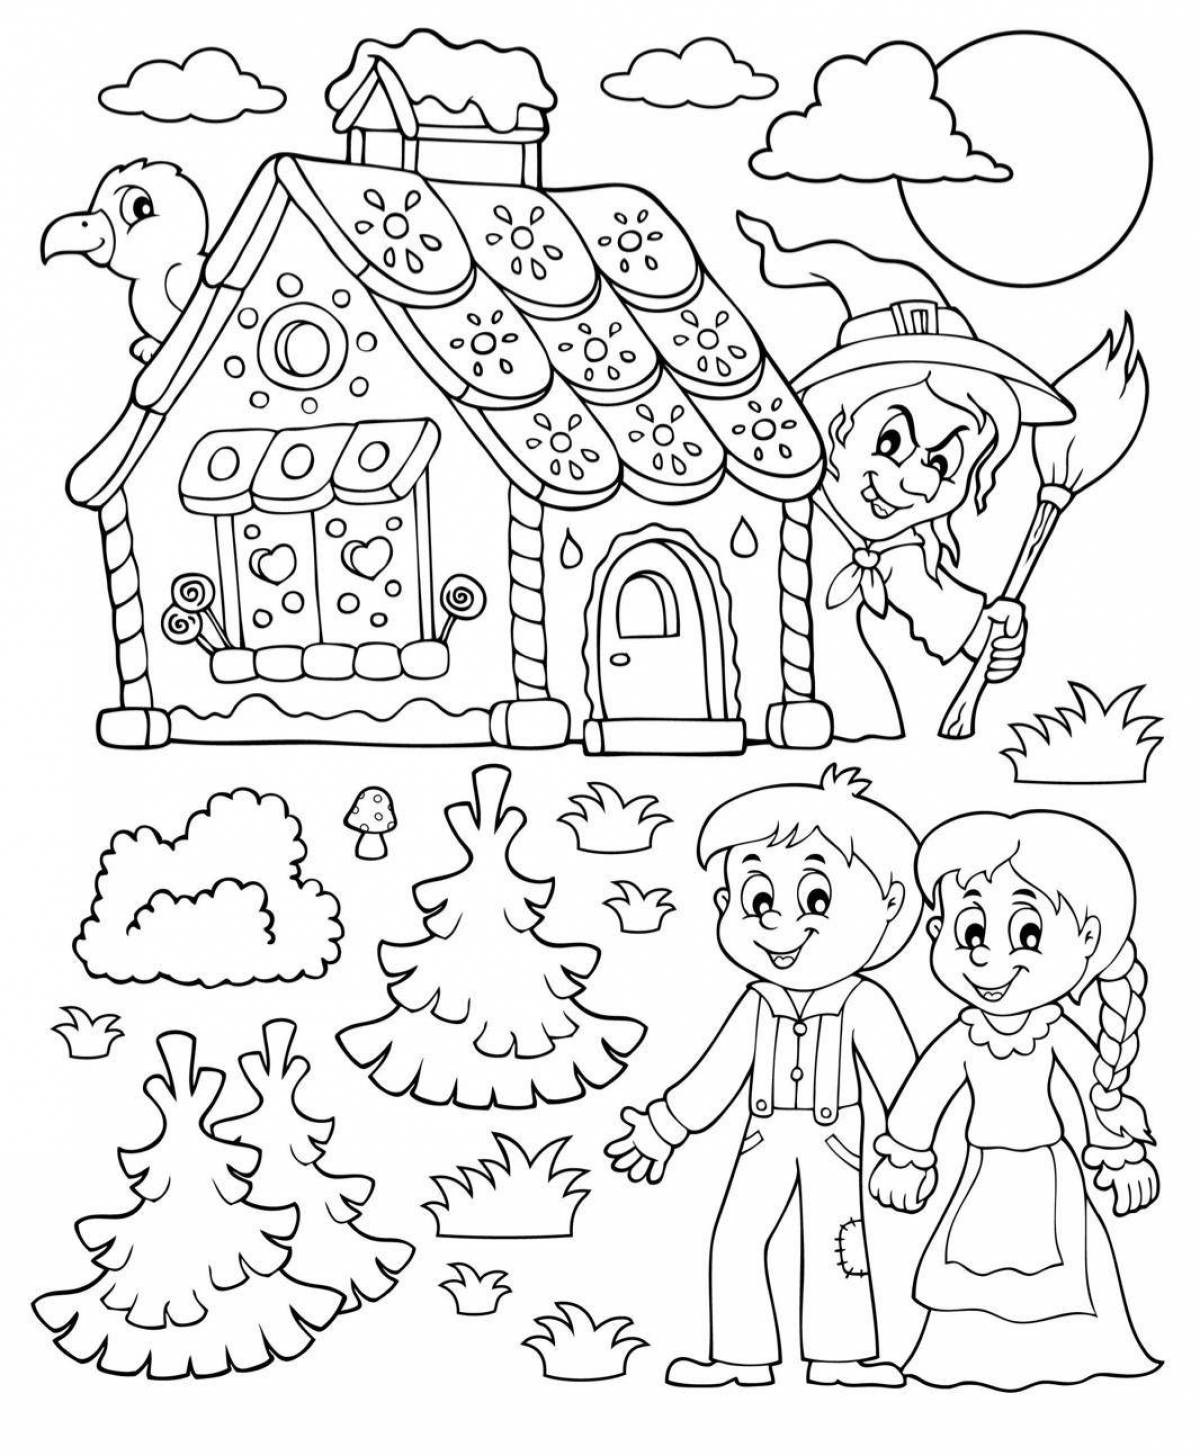 Exciting hansel and gretel coloring book